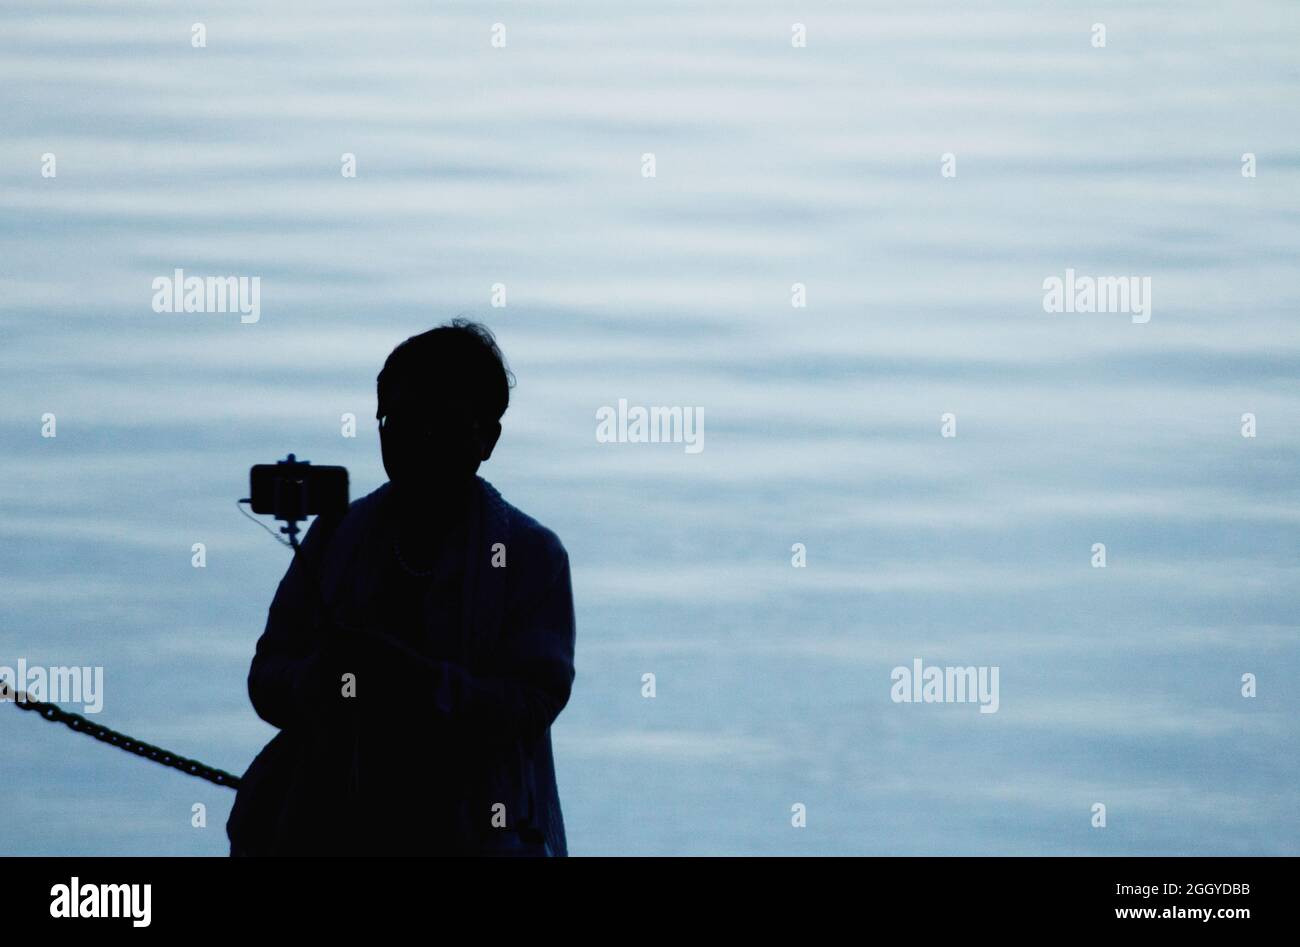 Silhouette of woman taking photograph of water at dusk, Victoria BC Canada. Stock Photo